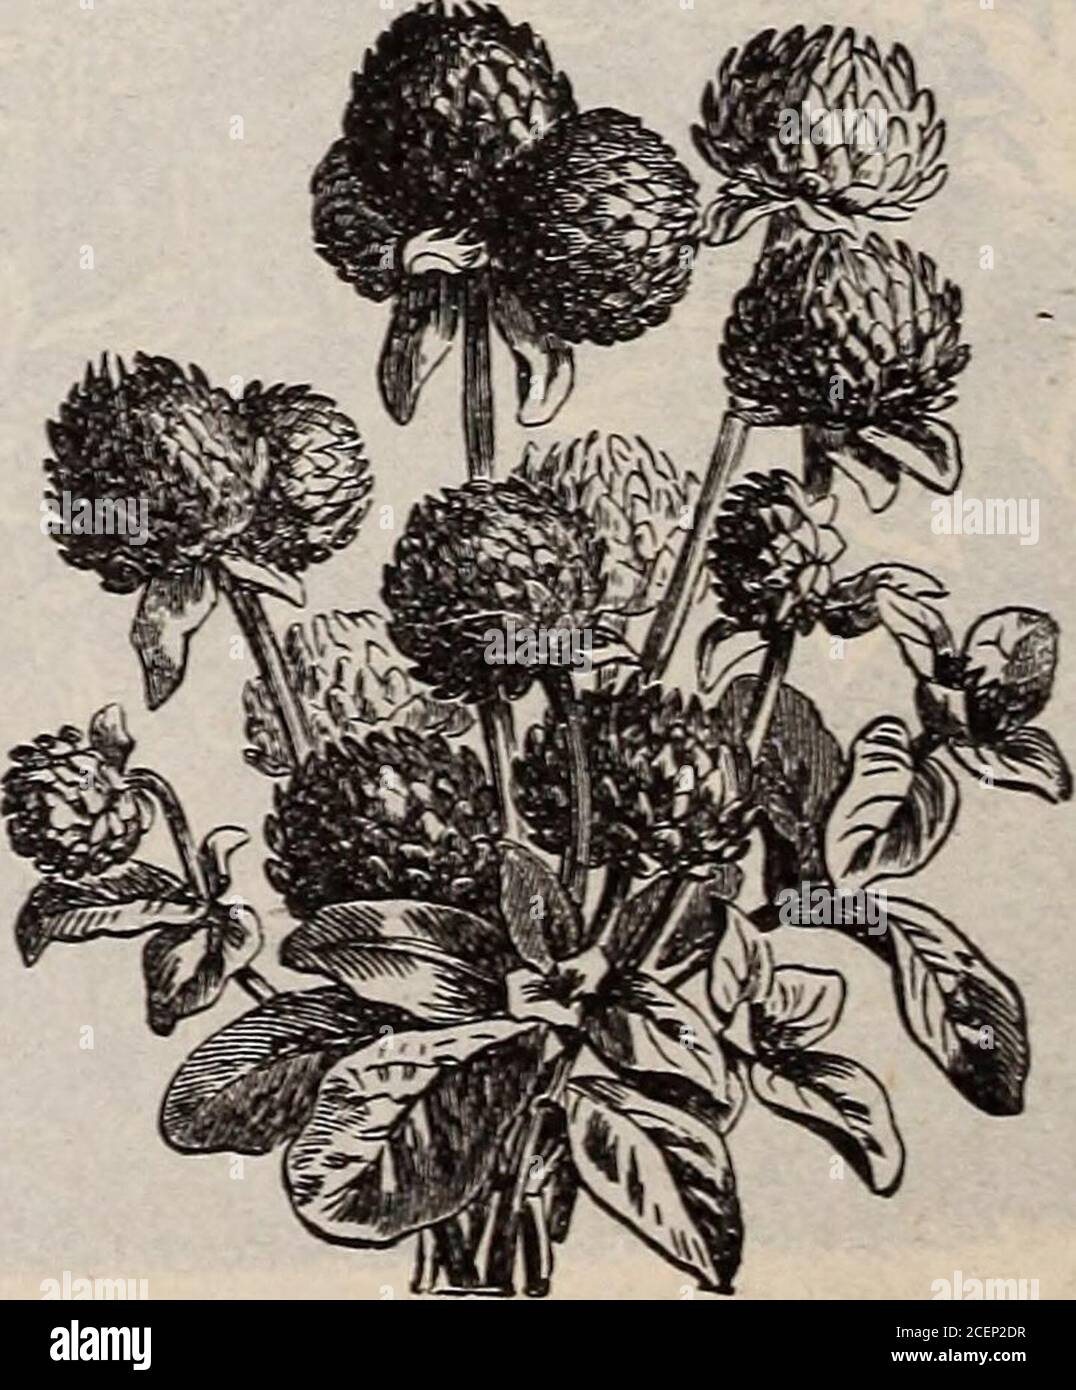 . Catalogue of seeds, agricultural & horticultural supplies and guide for the garden, field & farm. Helichrysum, Var. Globe Amaranthus. The Rose. Its cultivation, varieties, etc. (Ellwanger.) Mailed free, $1.35. Descriptive Catalogue of Seeds. 75 Height Price in feet, per pkt. Globe Amaranthus, hha. Purple 1 5c White 1 5c Fine mixed, (see cut) 1 5c Gomphrenaglobosa, also called English Clover. If cut at the proper time will last for years. Gnaphalium Leontopodium. White i 15c The true Alpine Edelweiss, so eagerly sought for and so highly prized. Helichrysum. (See cut.) Dwarf, double mixed 1 10 Stock Photo